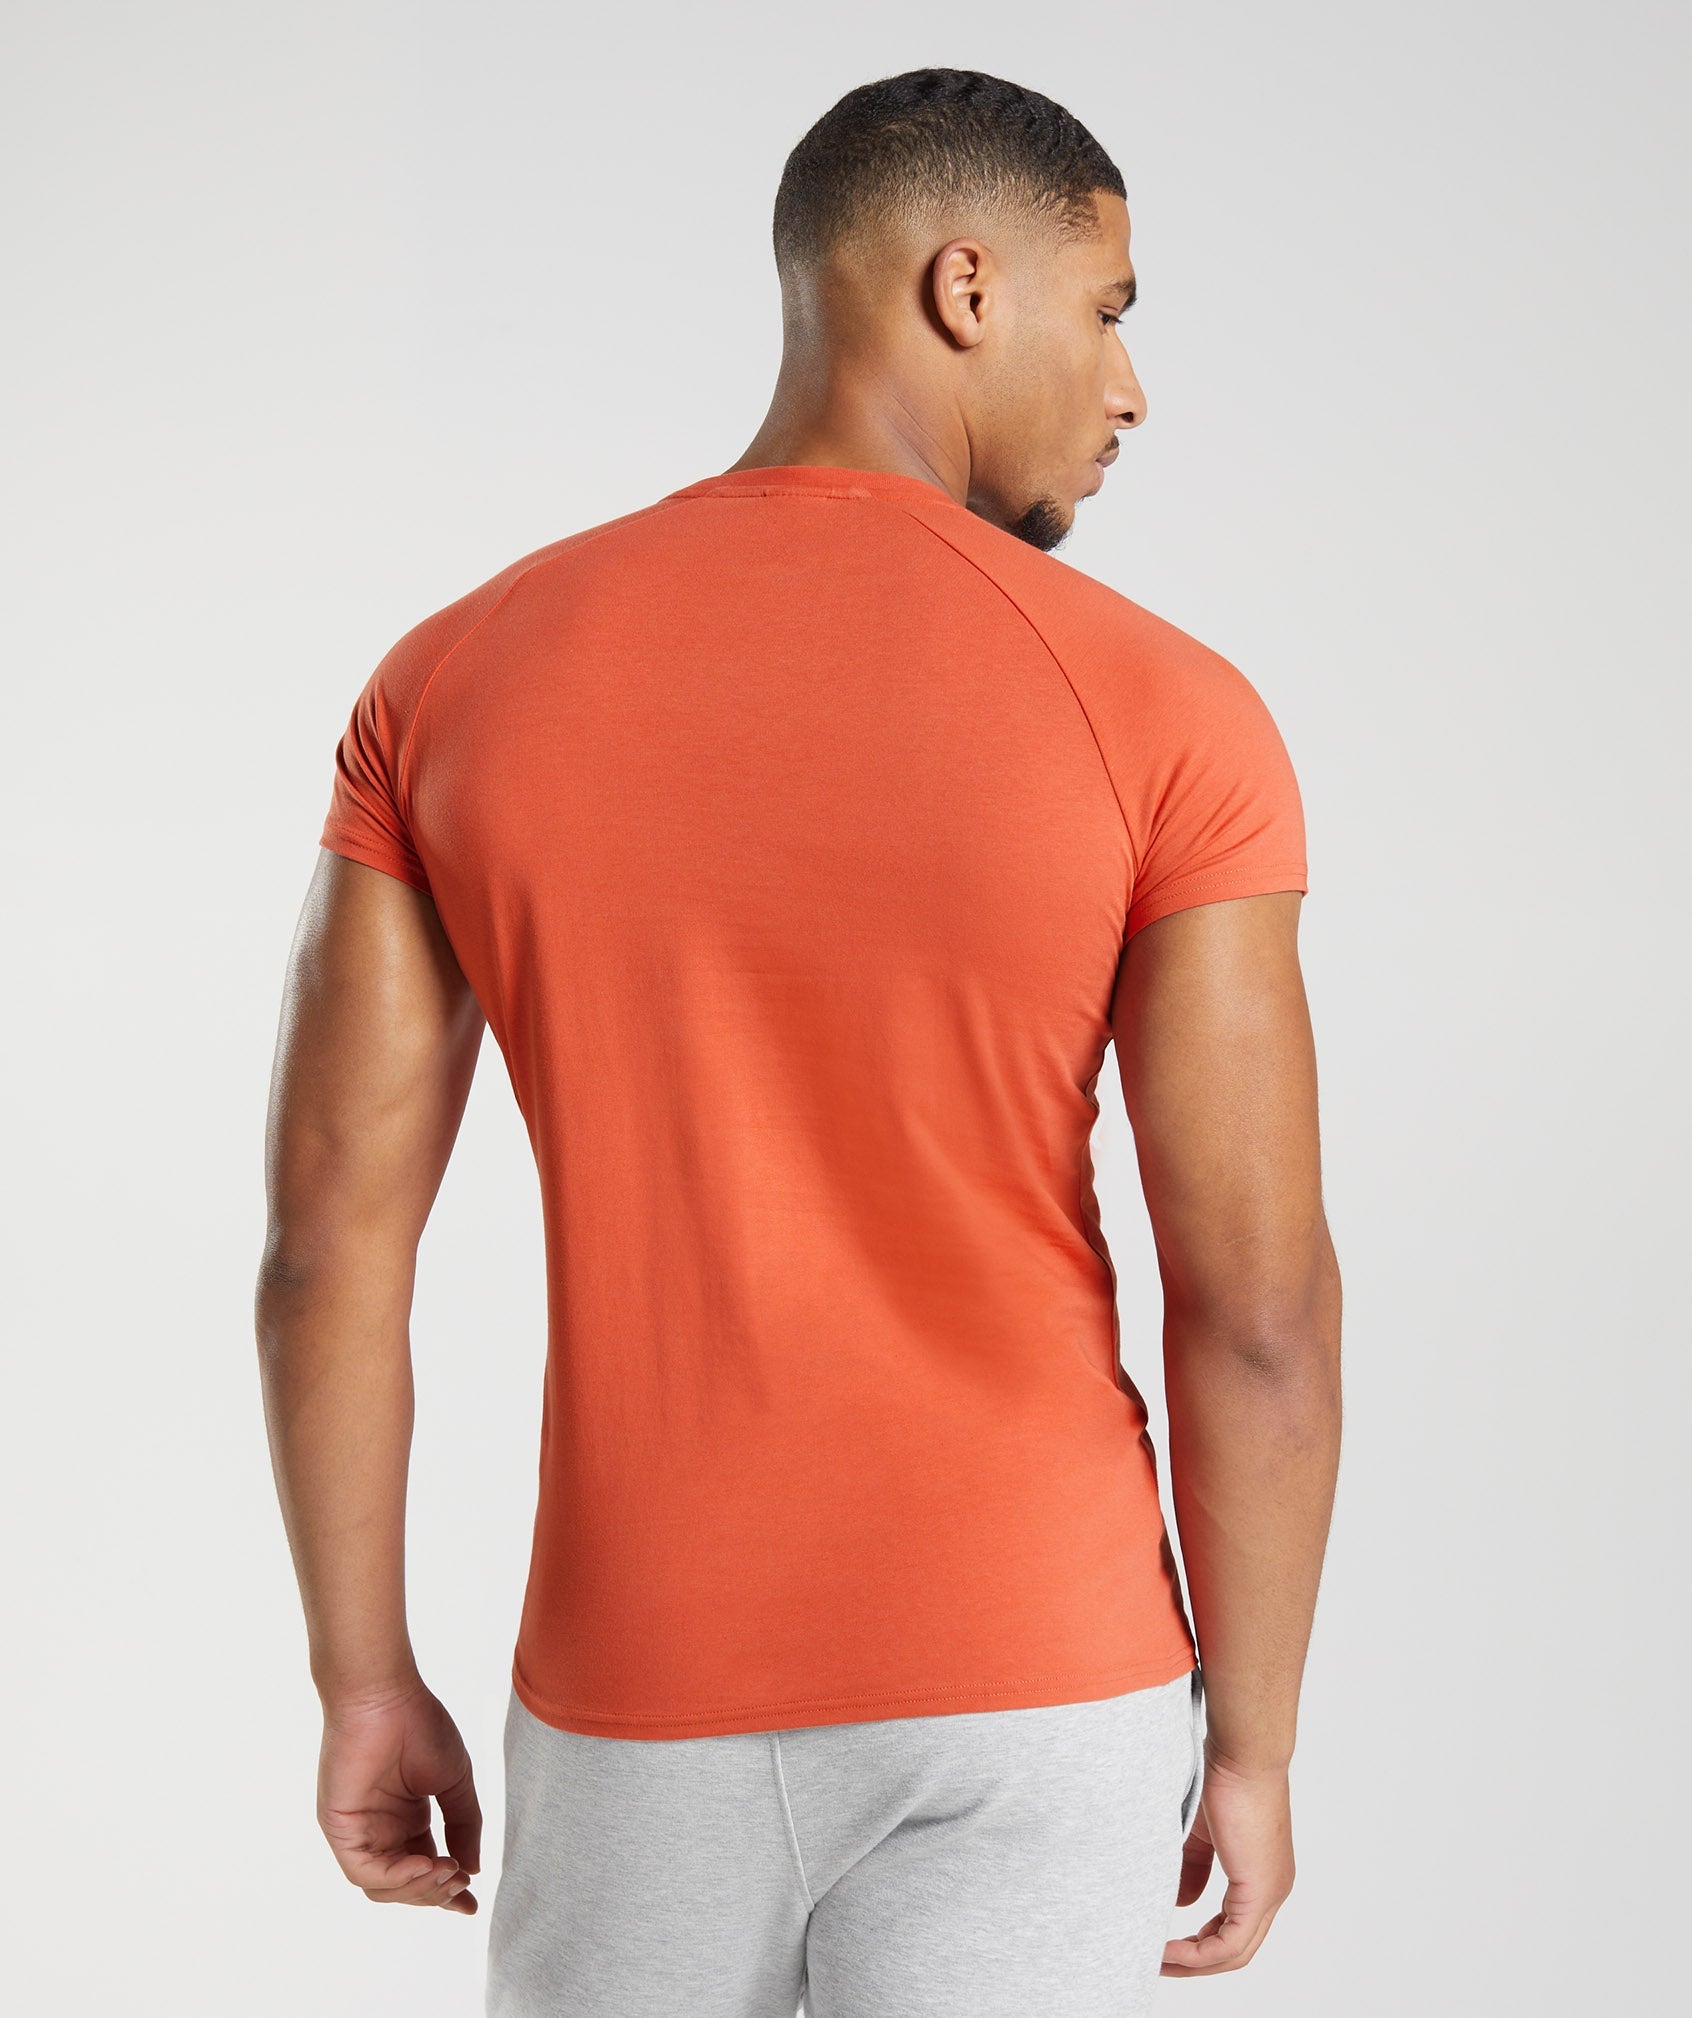 Gymshark Apollo T-Shirt - Storm Red